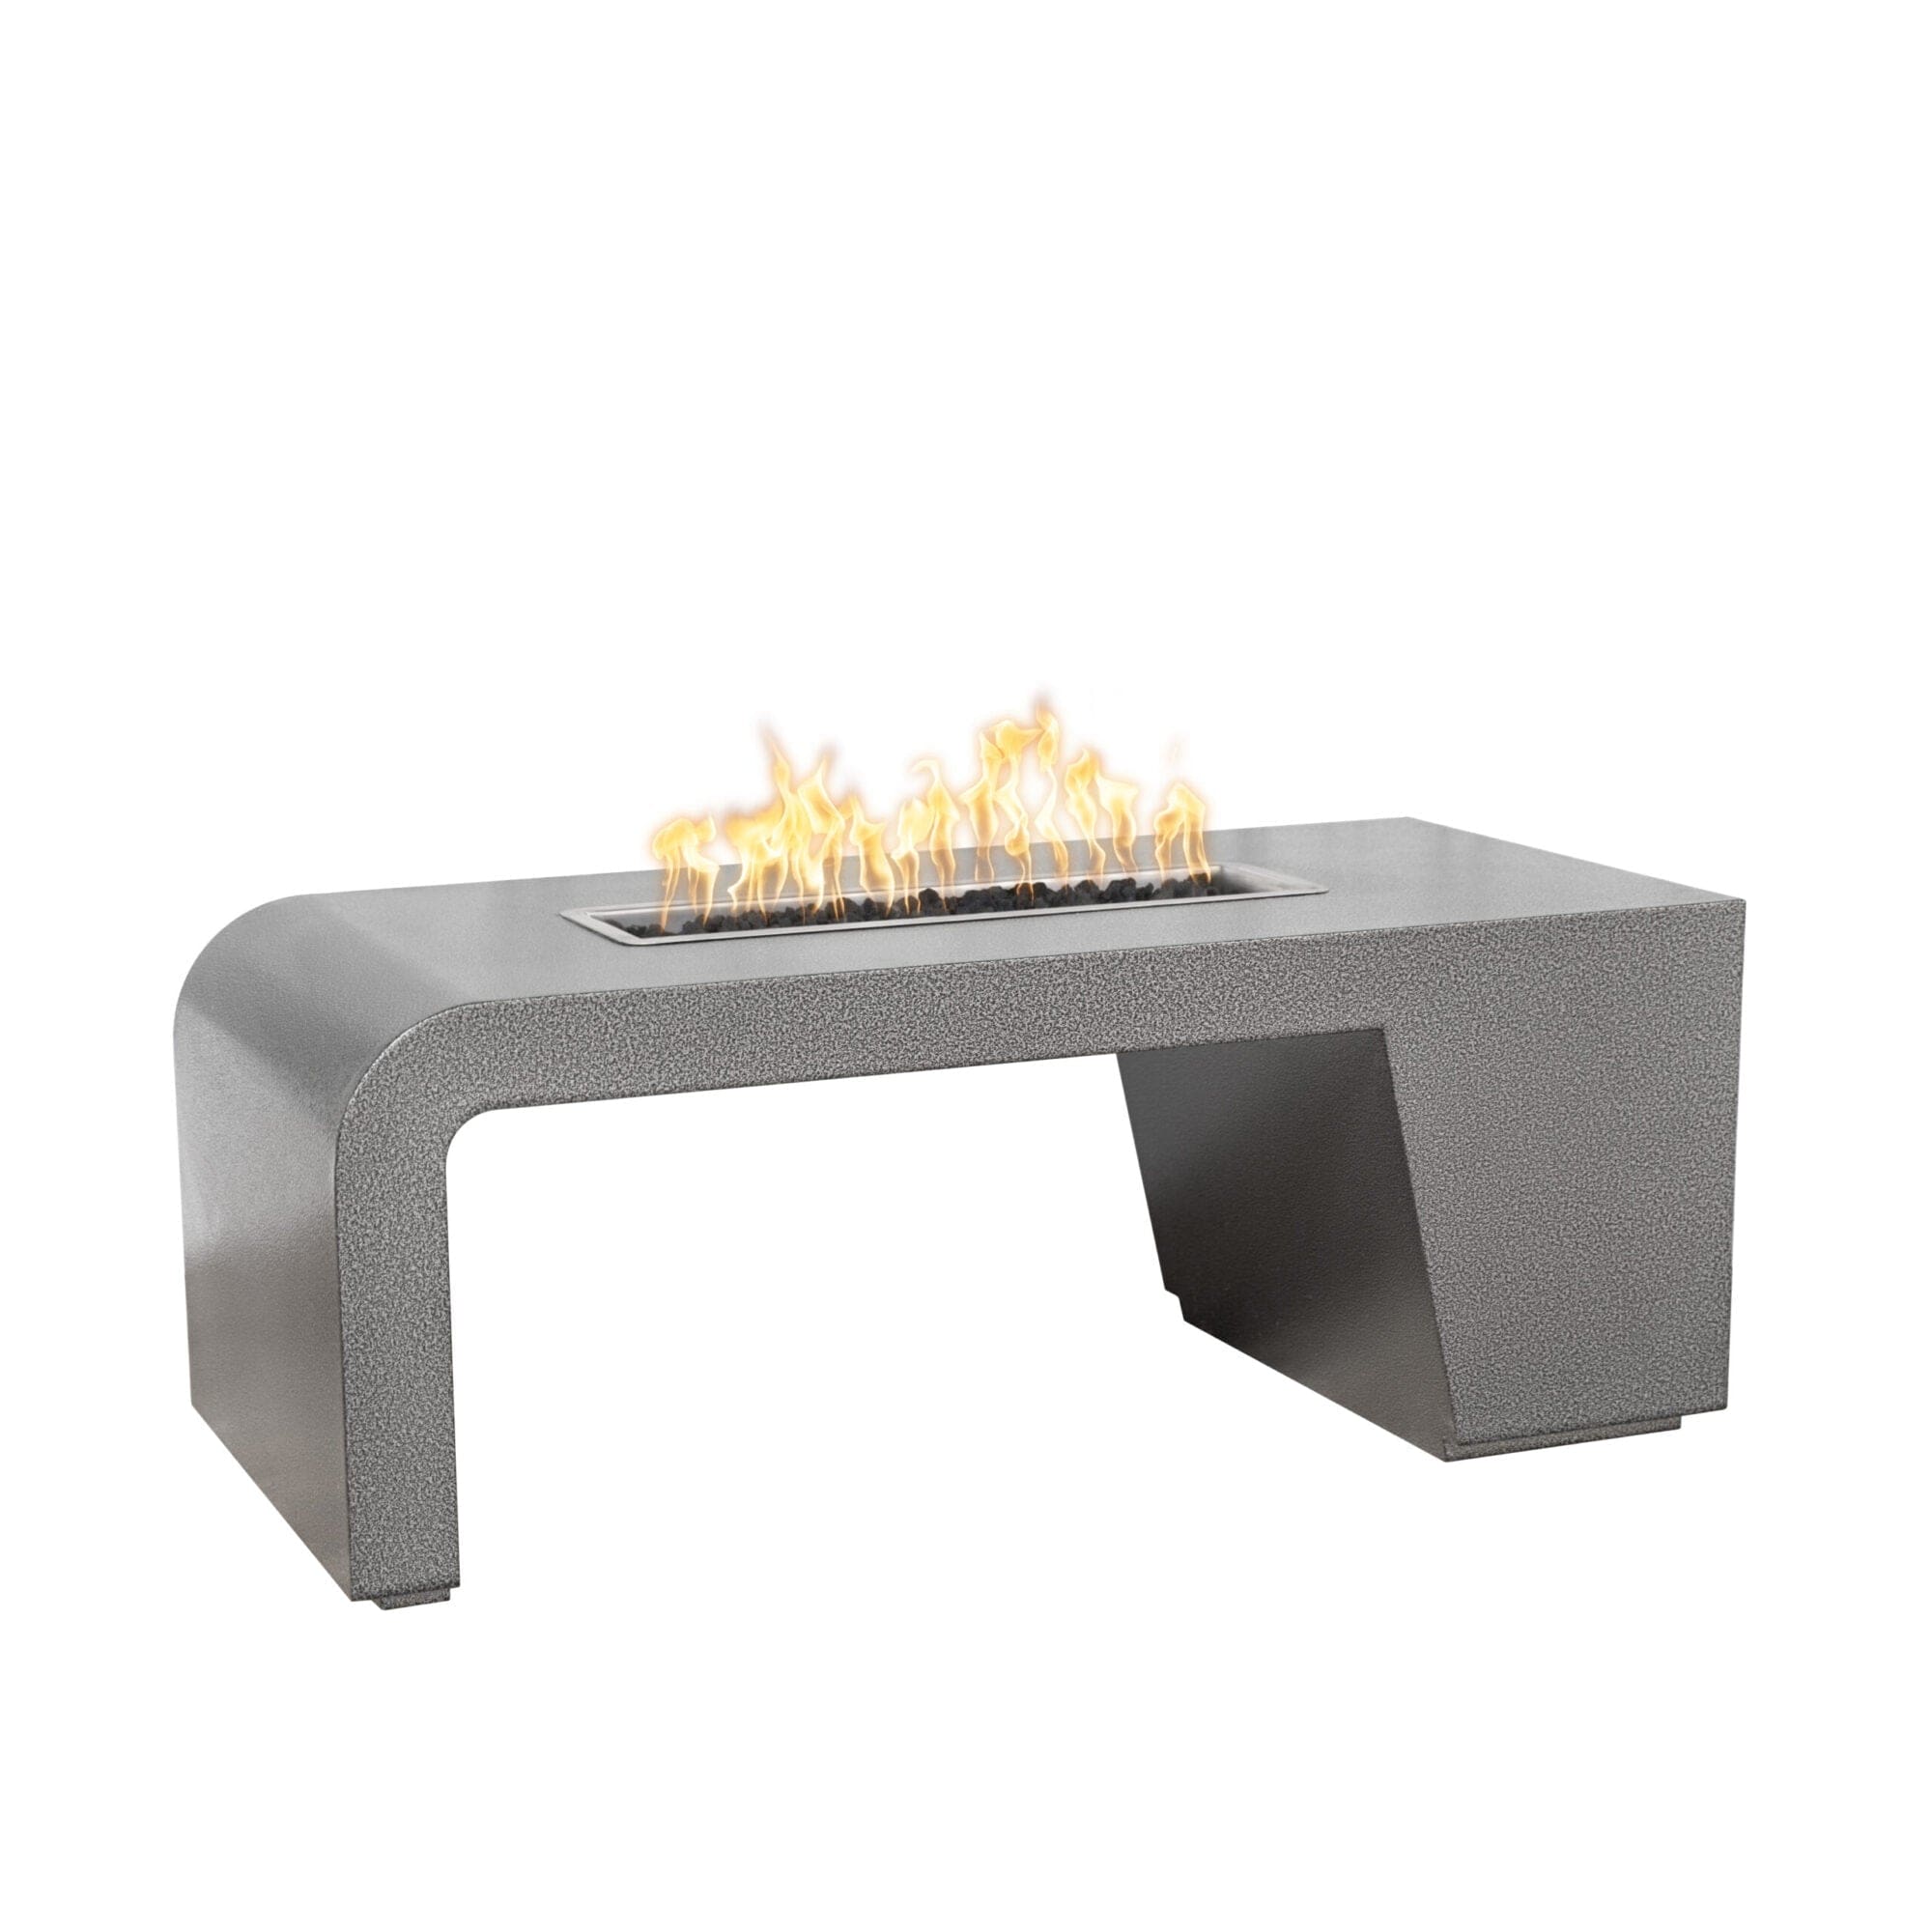 The Outdoor Plus Fire Pit 60" / Match Lit The Outdoor Plus Maywood Fire Pit | Metal Powder Coat OPT-MYWPC60